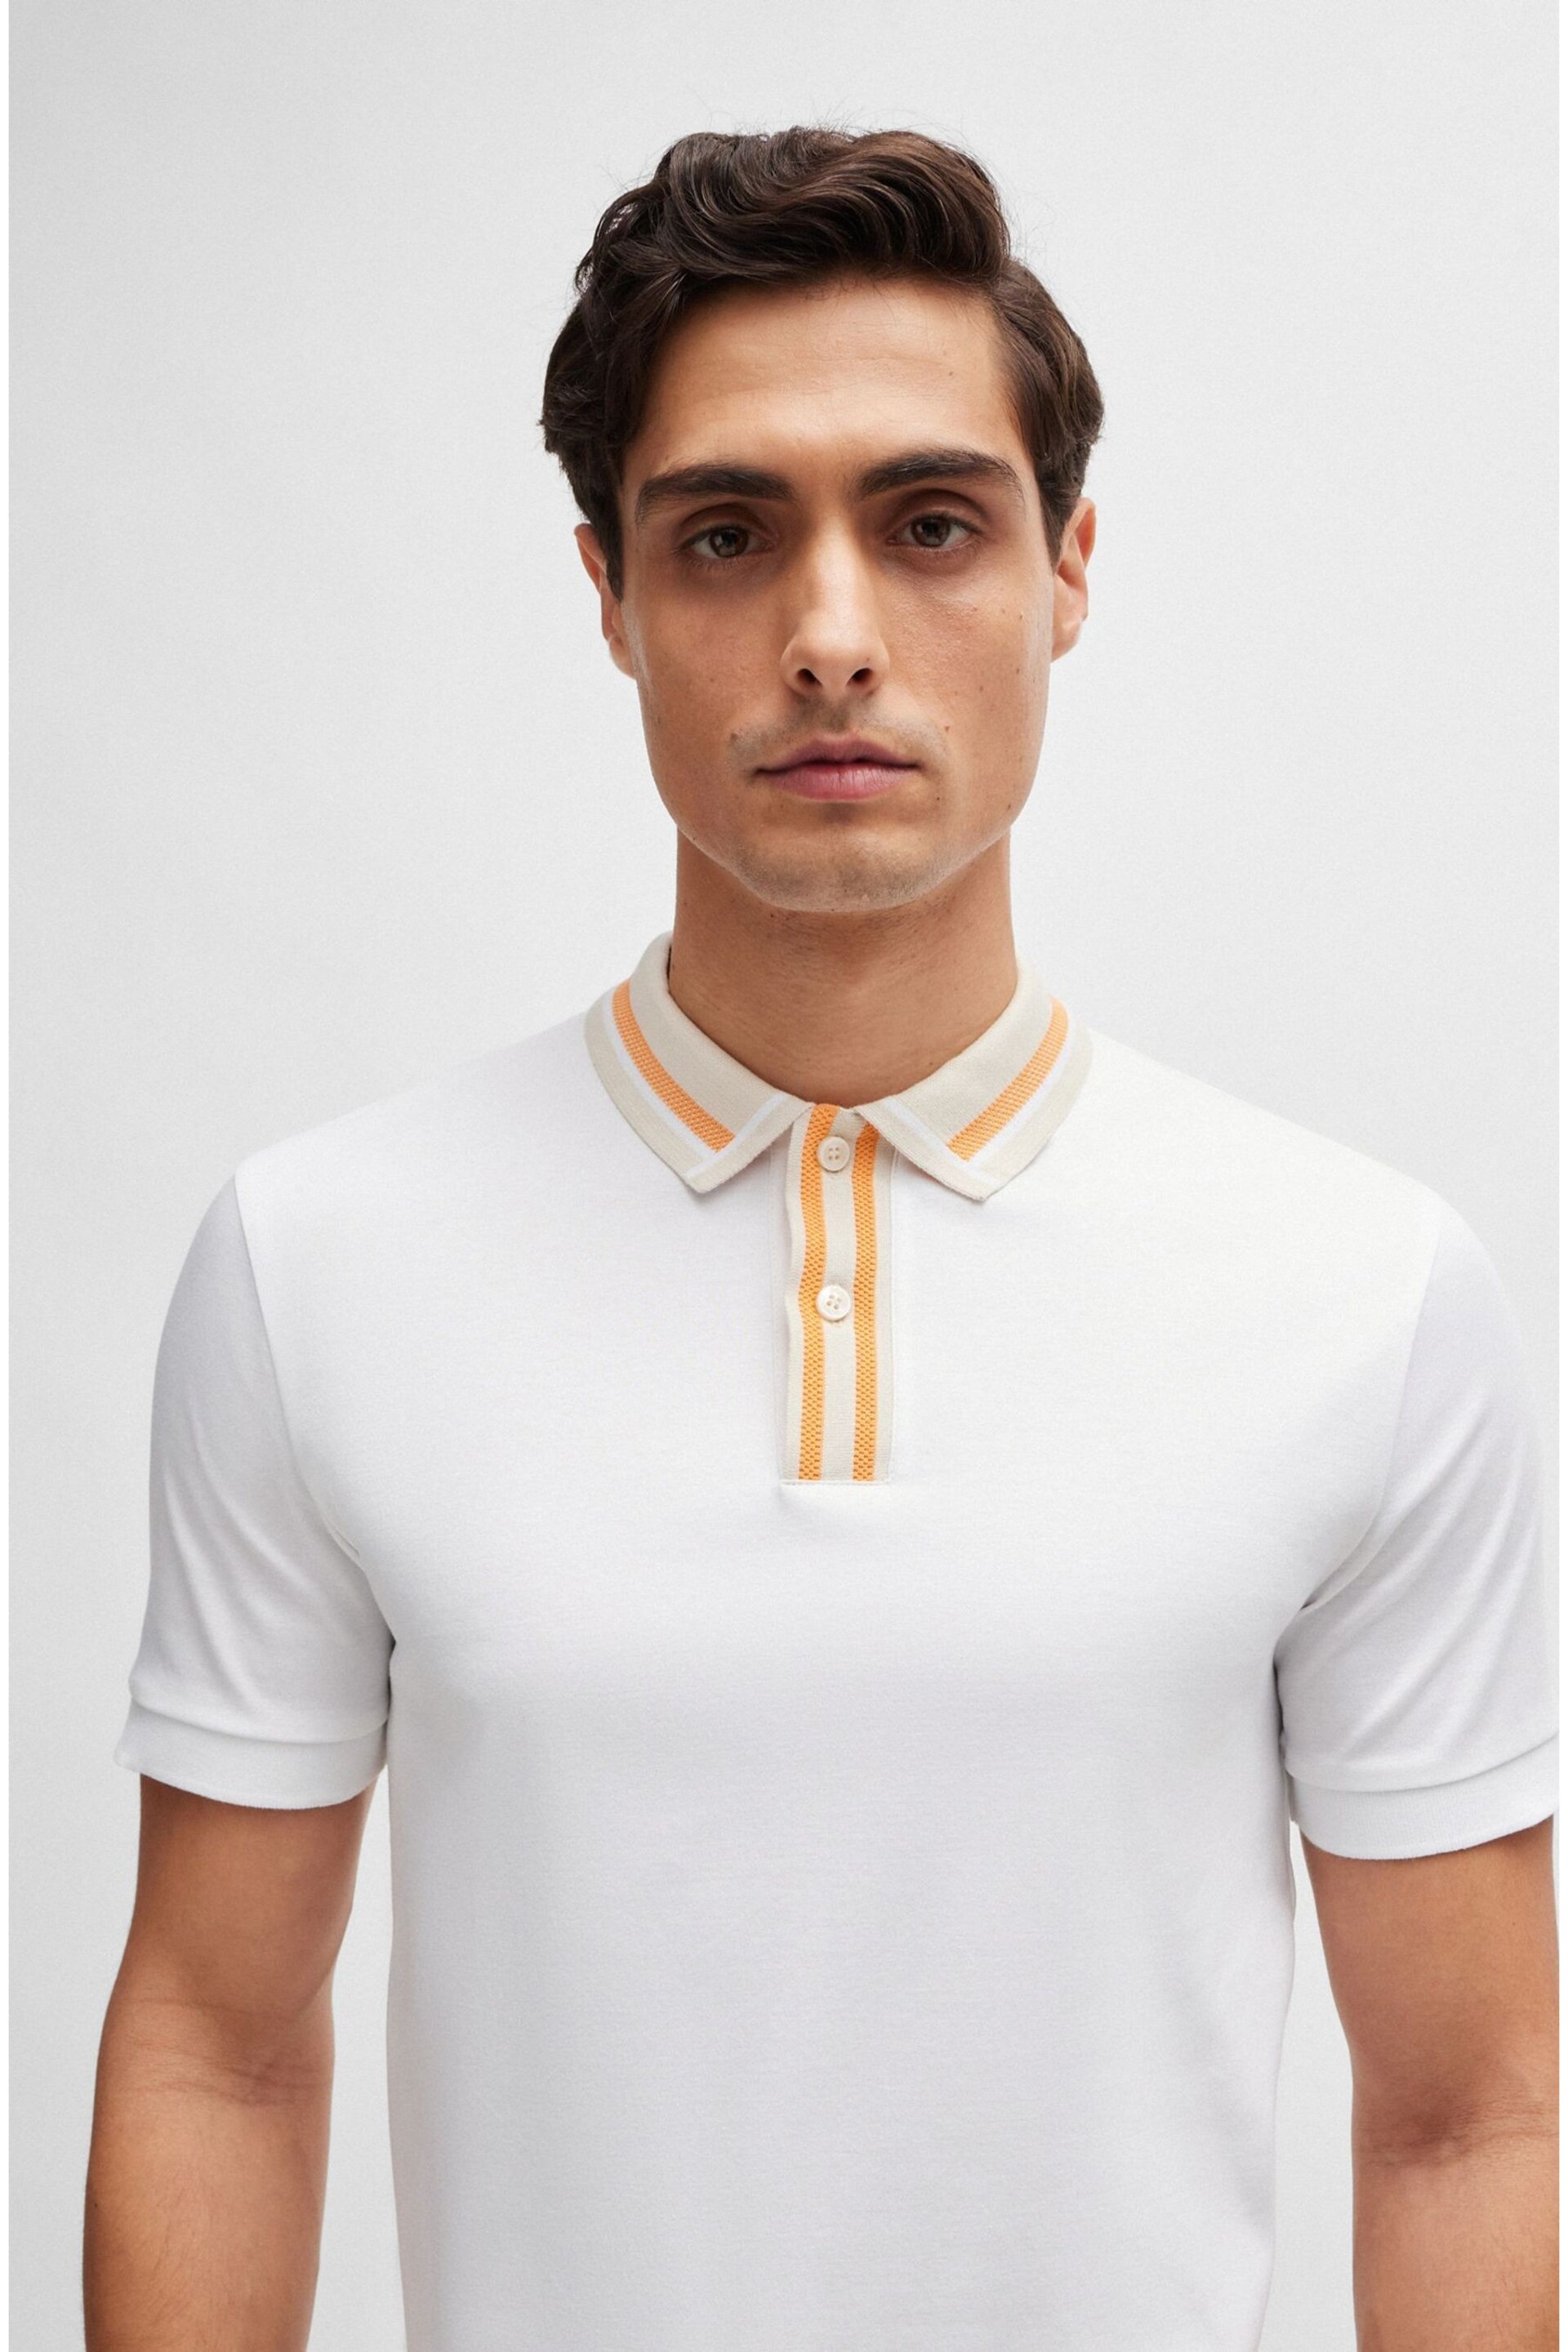 BOSS White Contrast Collar Slim Fit Polo Shirt - Image 1 of 5